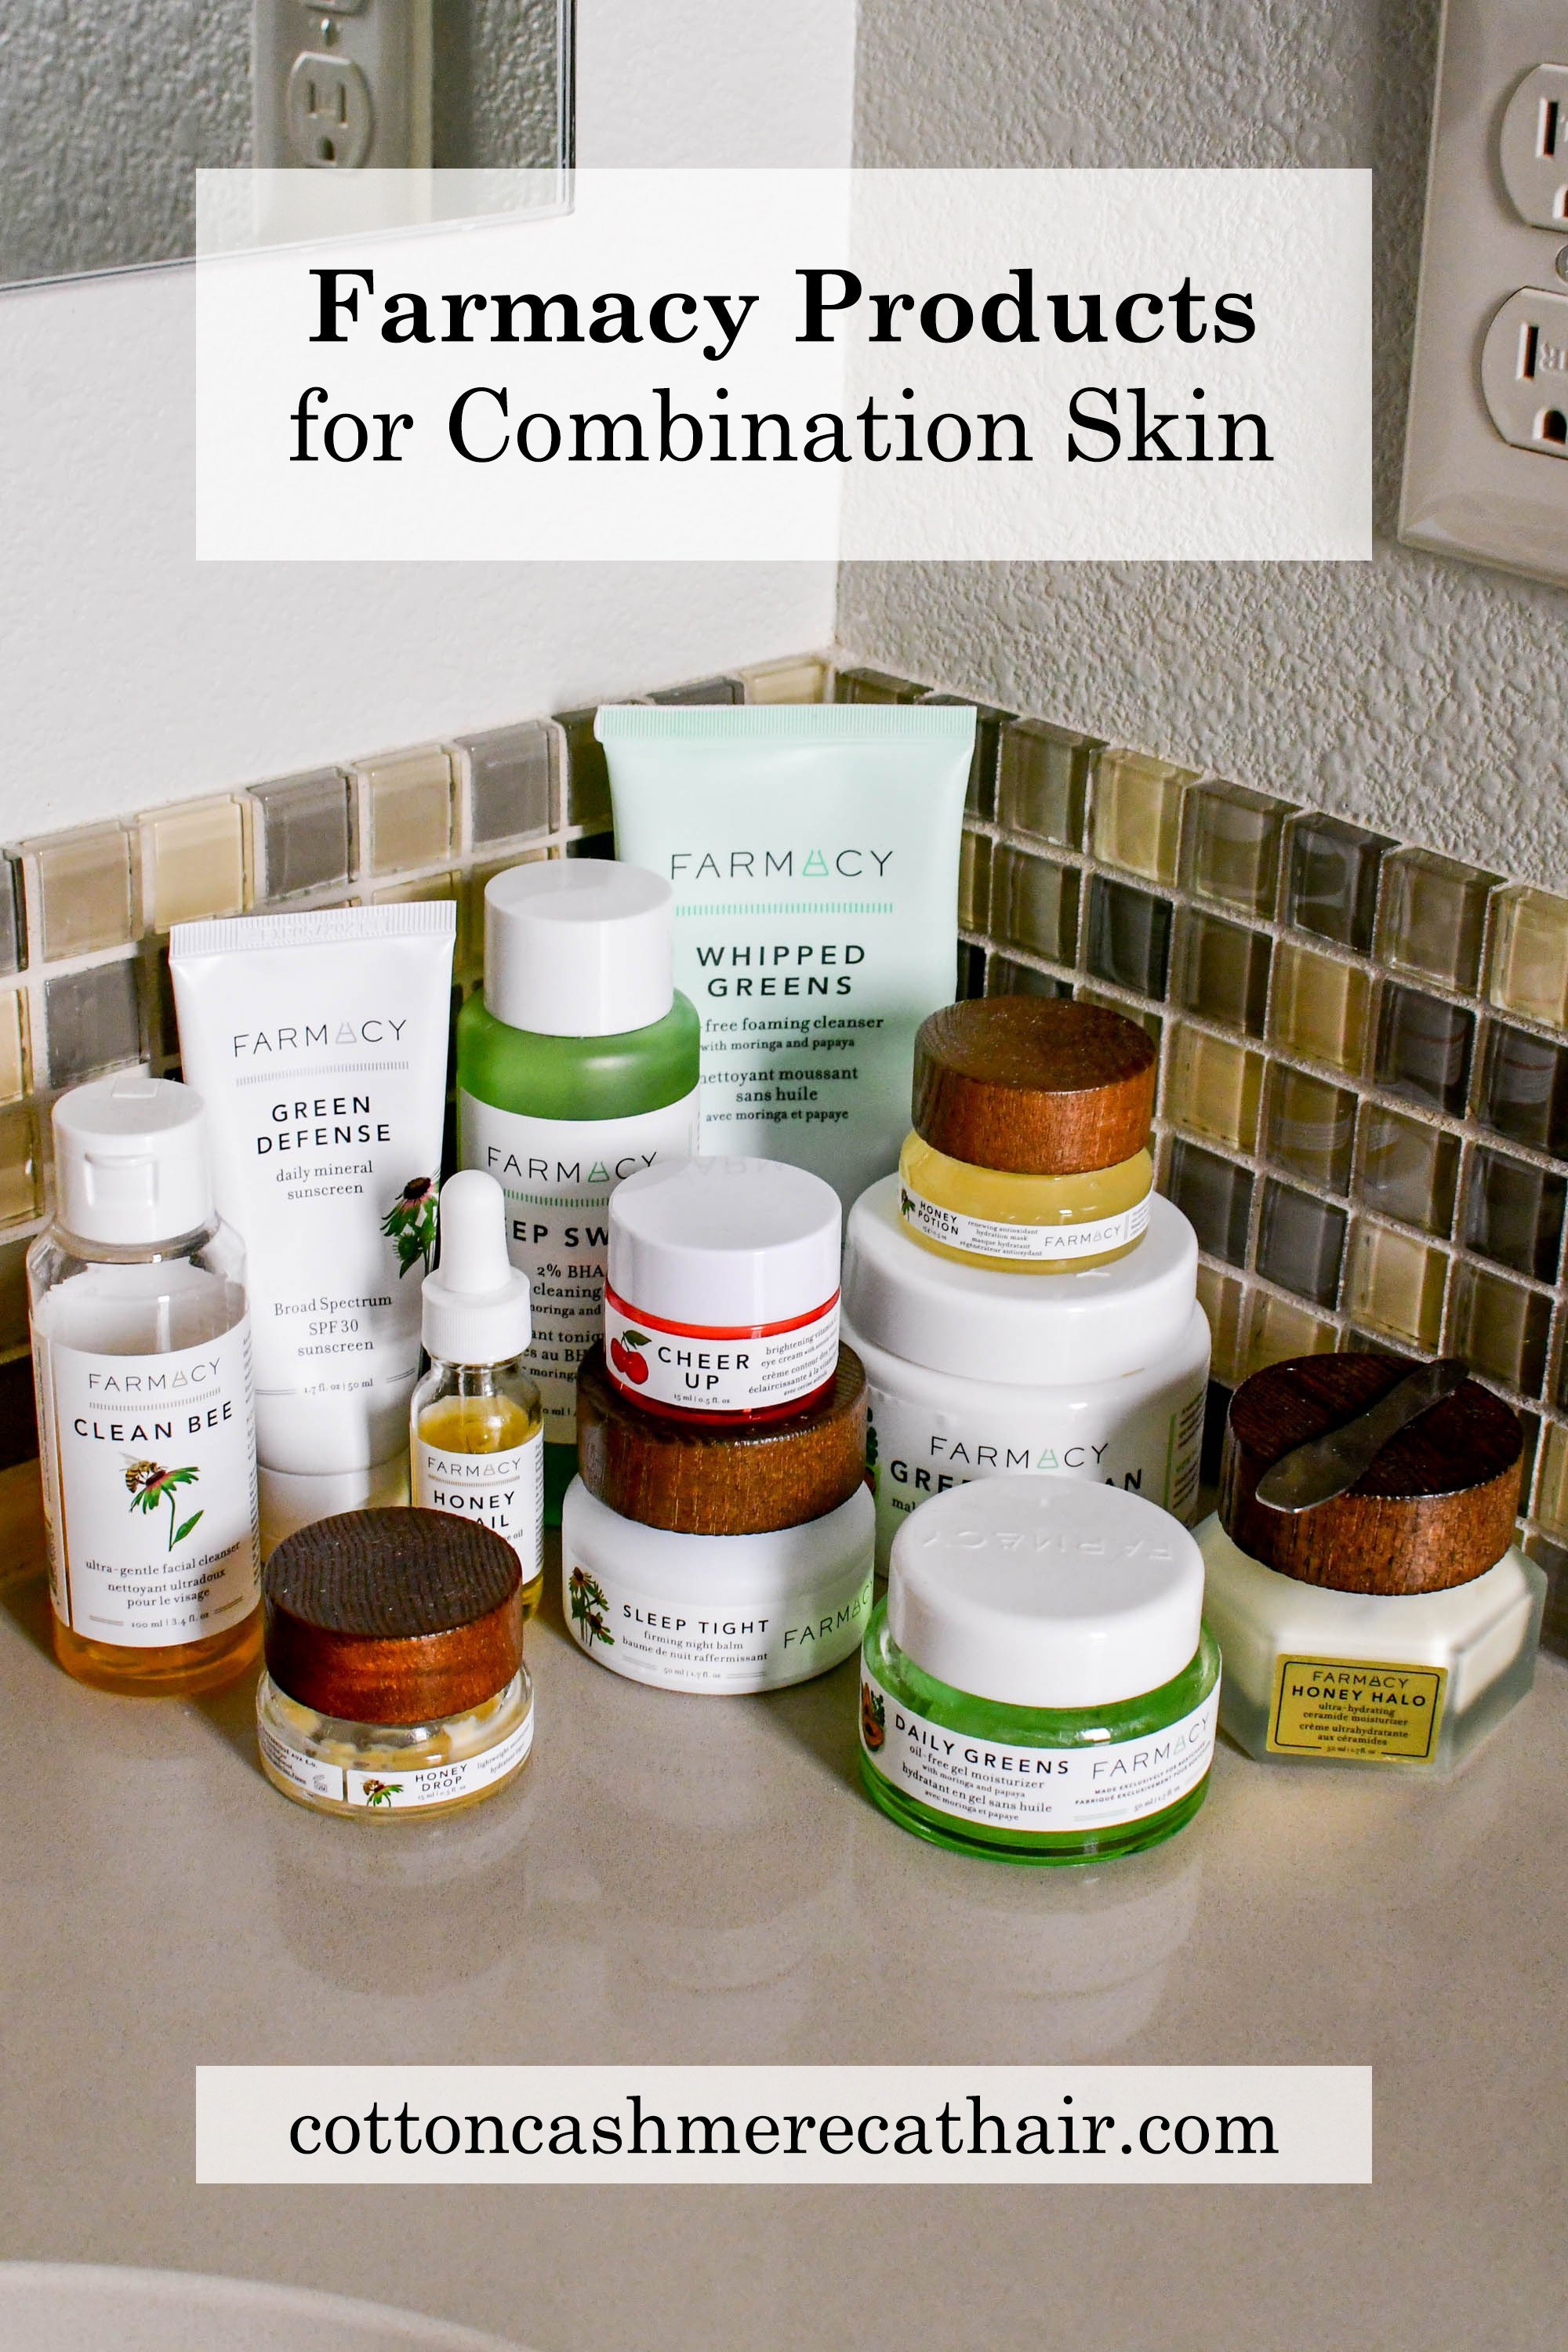 Farmacy Products for Combination Skin